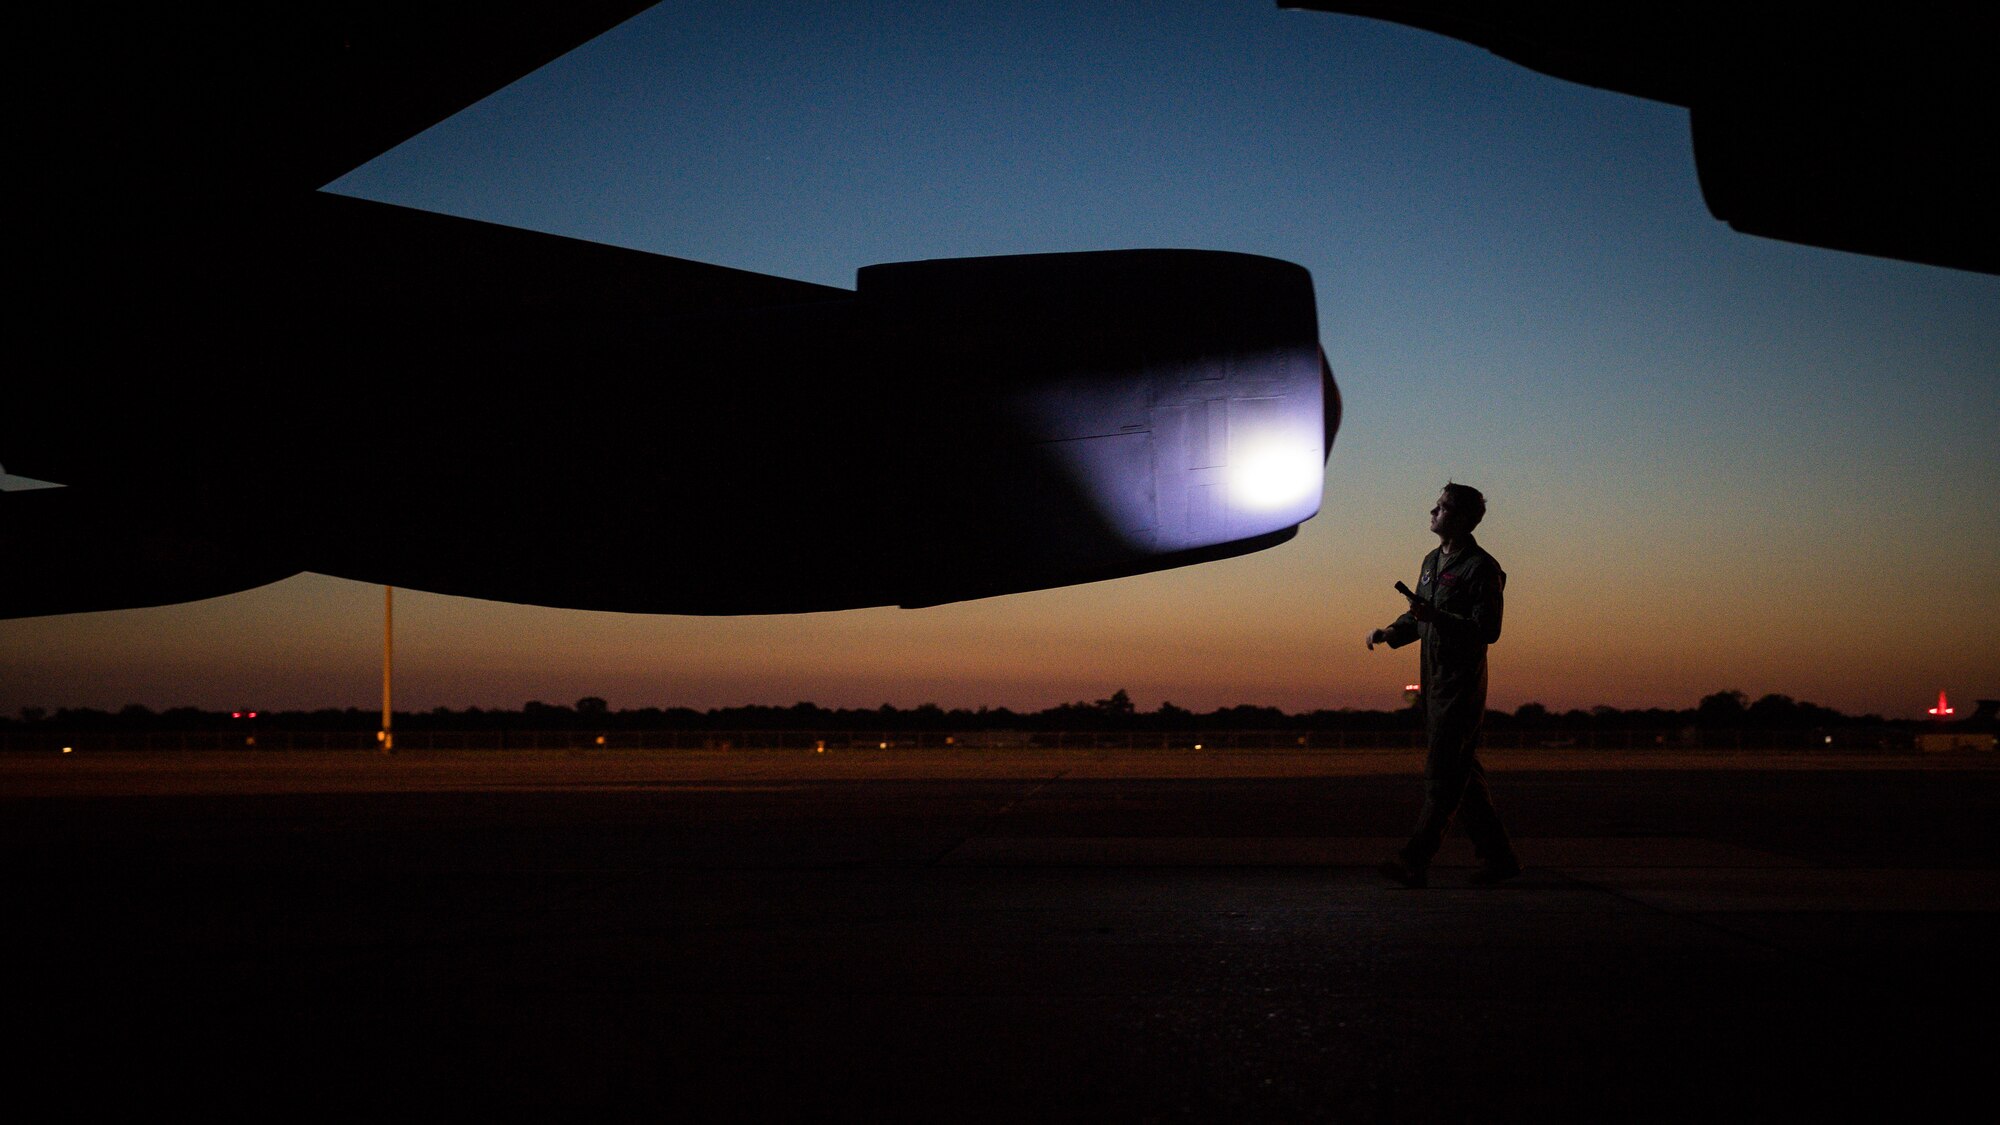 Capt. Mike Brogan, 96th Bomb Squadron pilot, inspects a B-52H Stratofortress while preparing for take off at Barksdale Air Force Base, La., May 7, 2020. Long-range, strategic bomber missions demonstrate the U.S capability to command, control and conduct strategic bomber missions around the globe, demonstrating U.S. commitment to allies and partners, the credibility and flexibility of our forces to address today’s complex, dynamic and volatile global security environment.